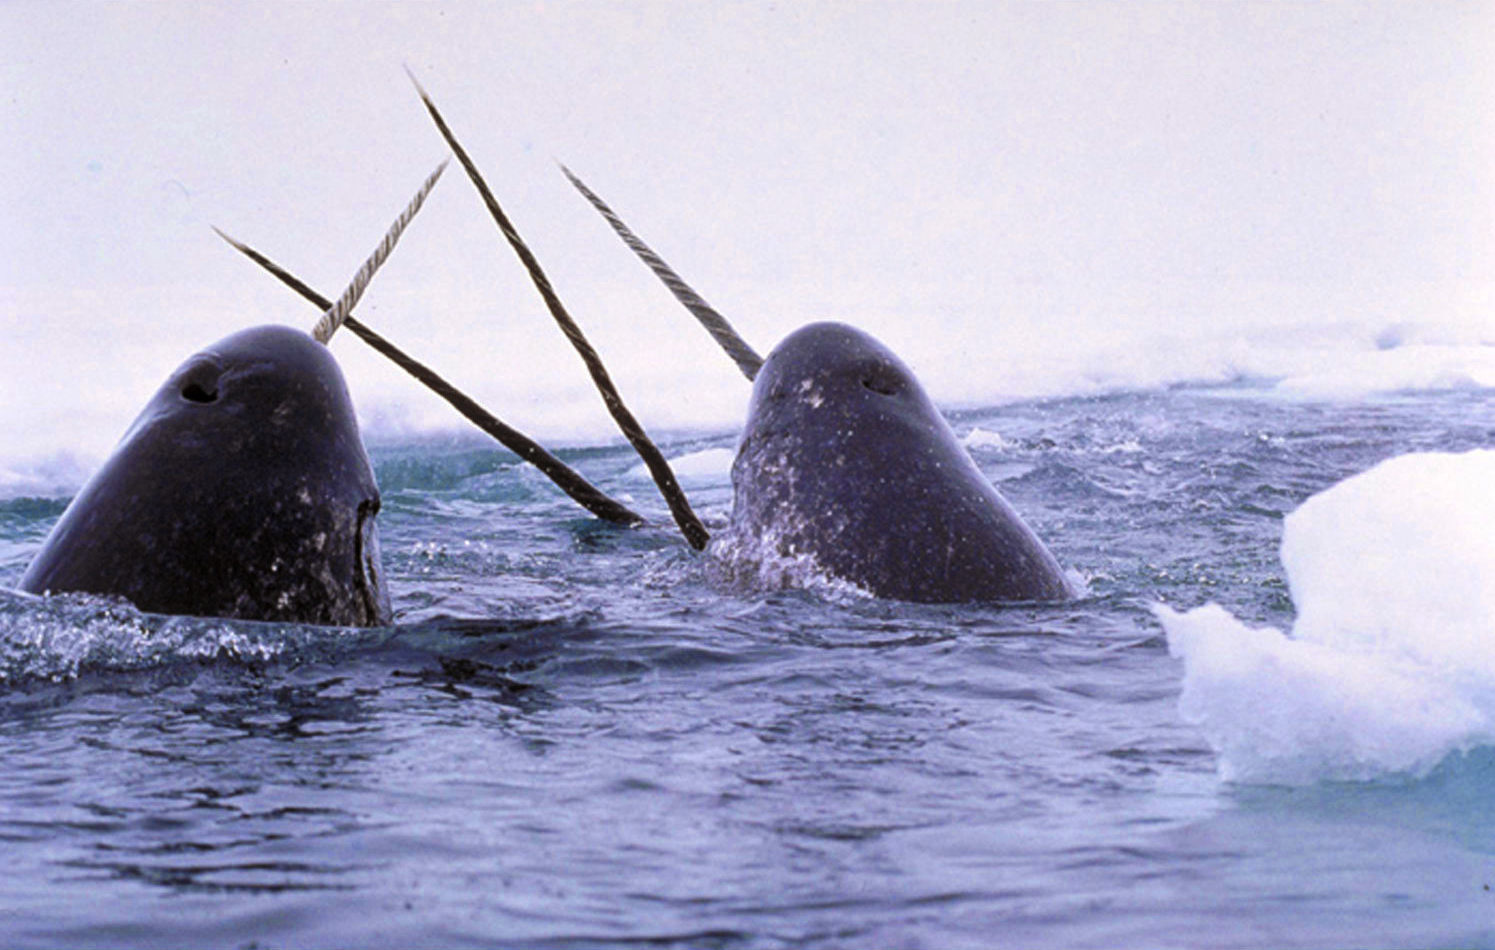 Narwhals breach the waters surface in the wild.